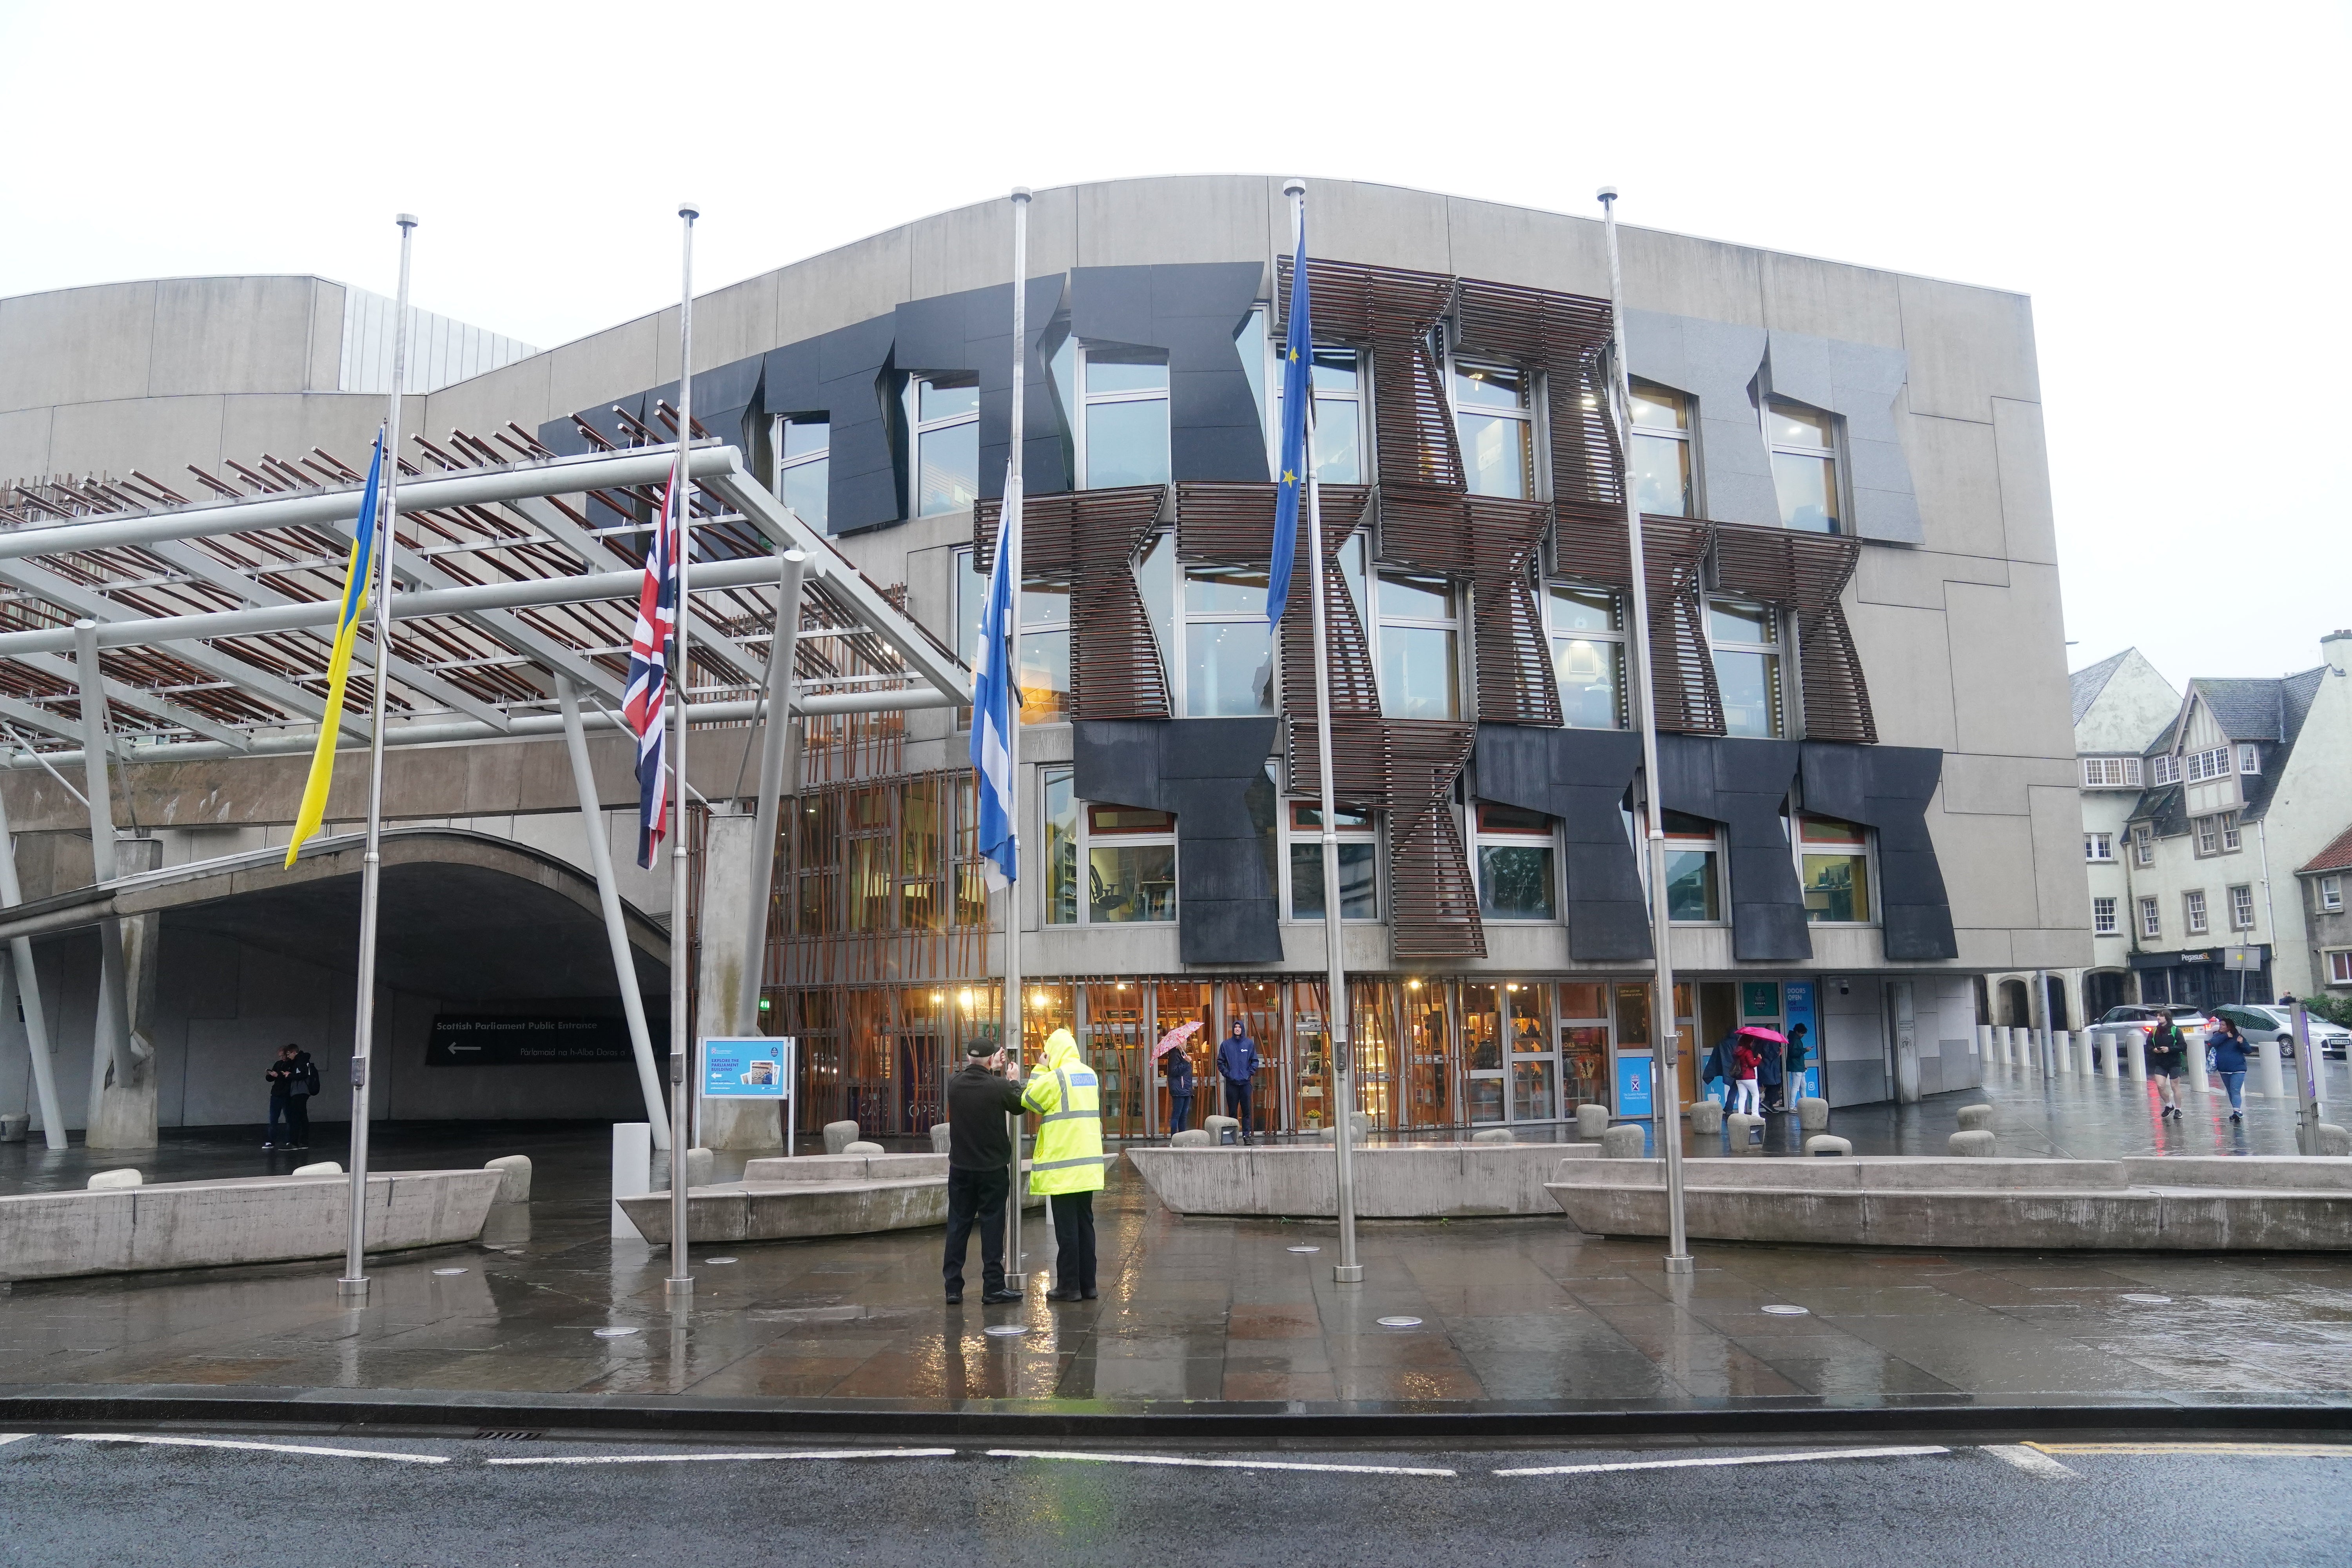 Flags are lowered to half mast outside the Scottish Parliament building at Holyrood in Edinburgh (Jane Barlow/PA)